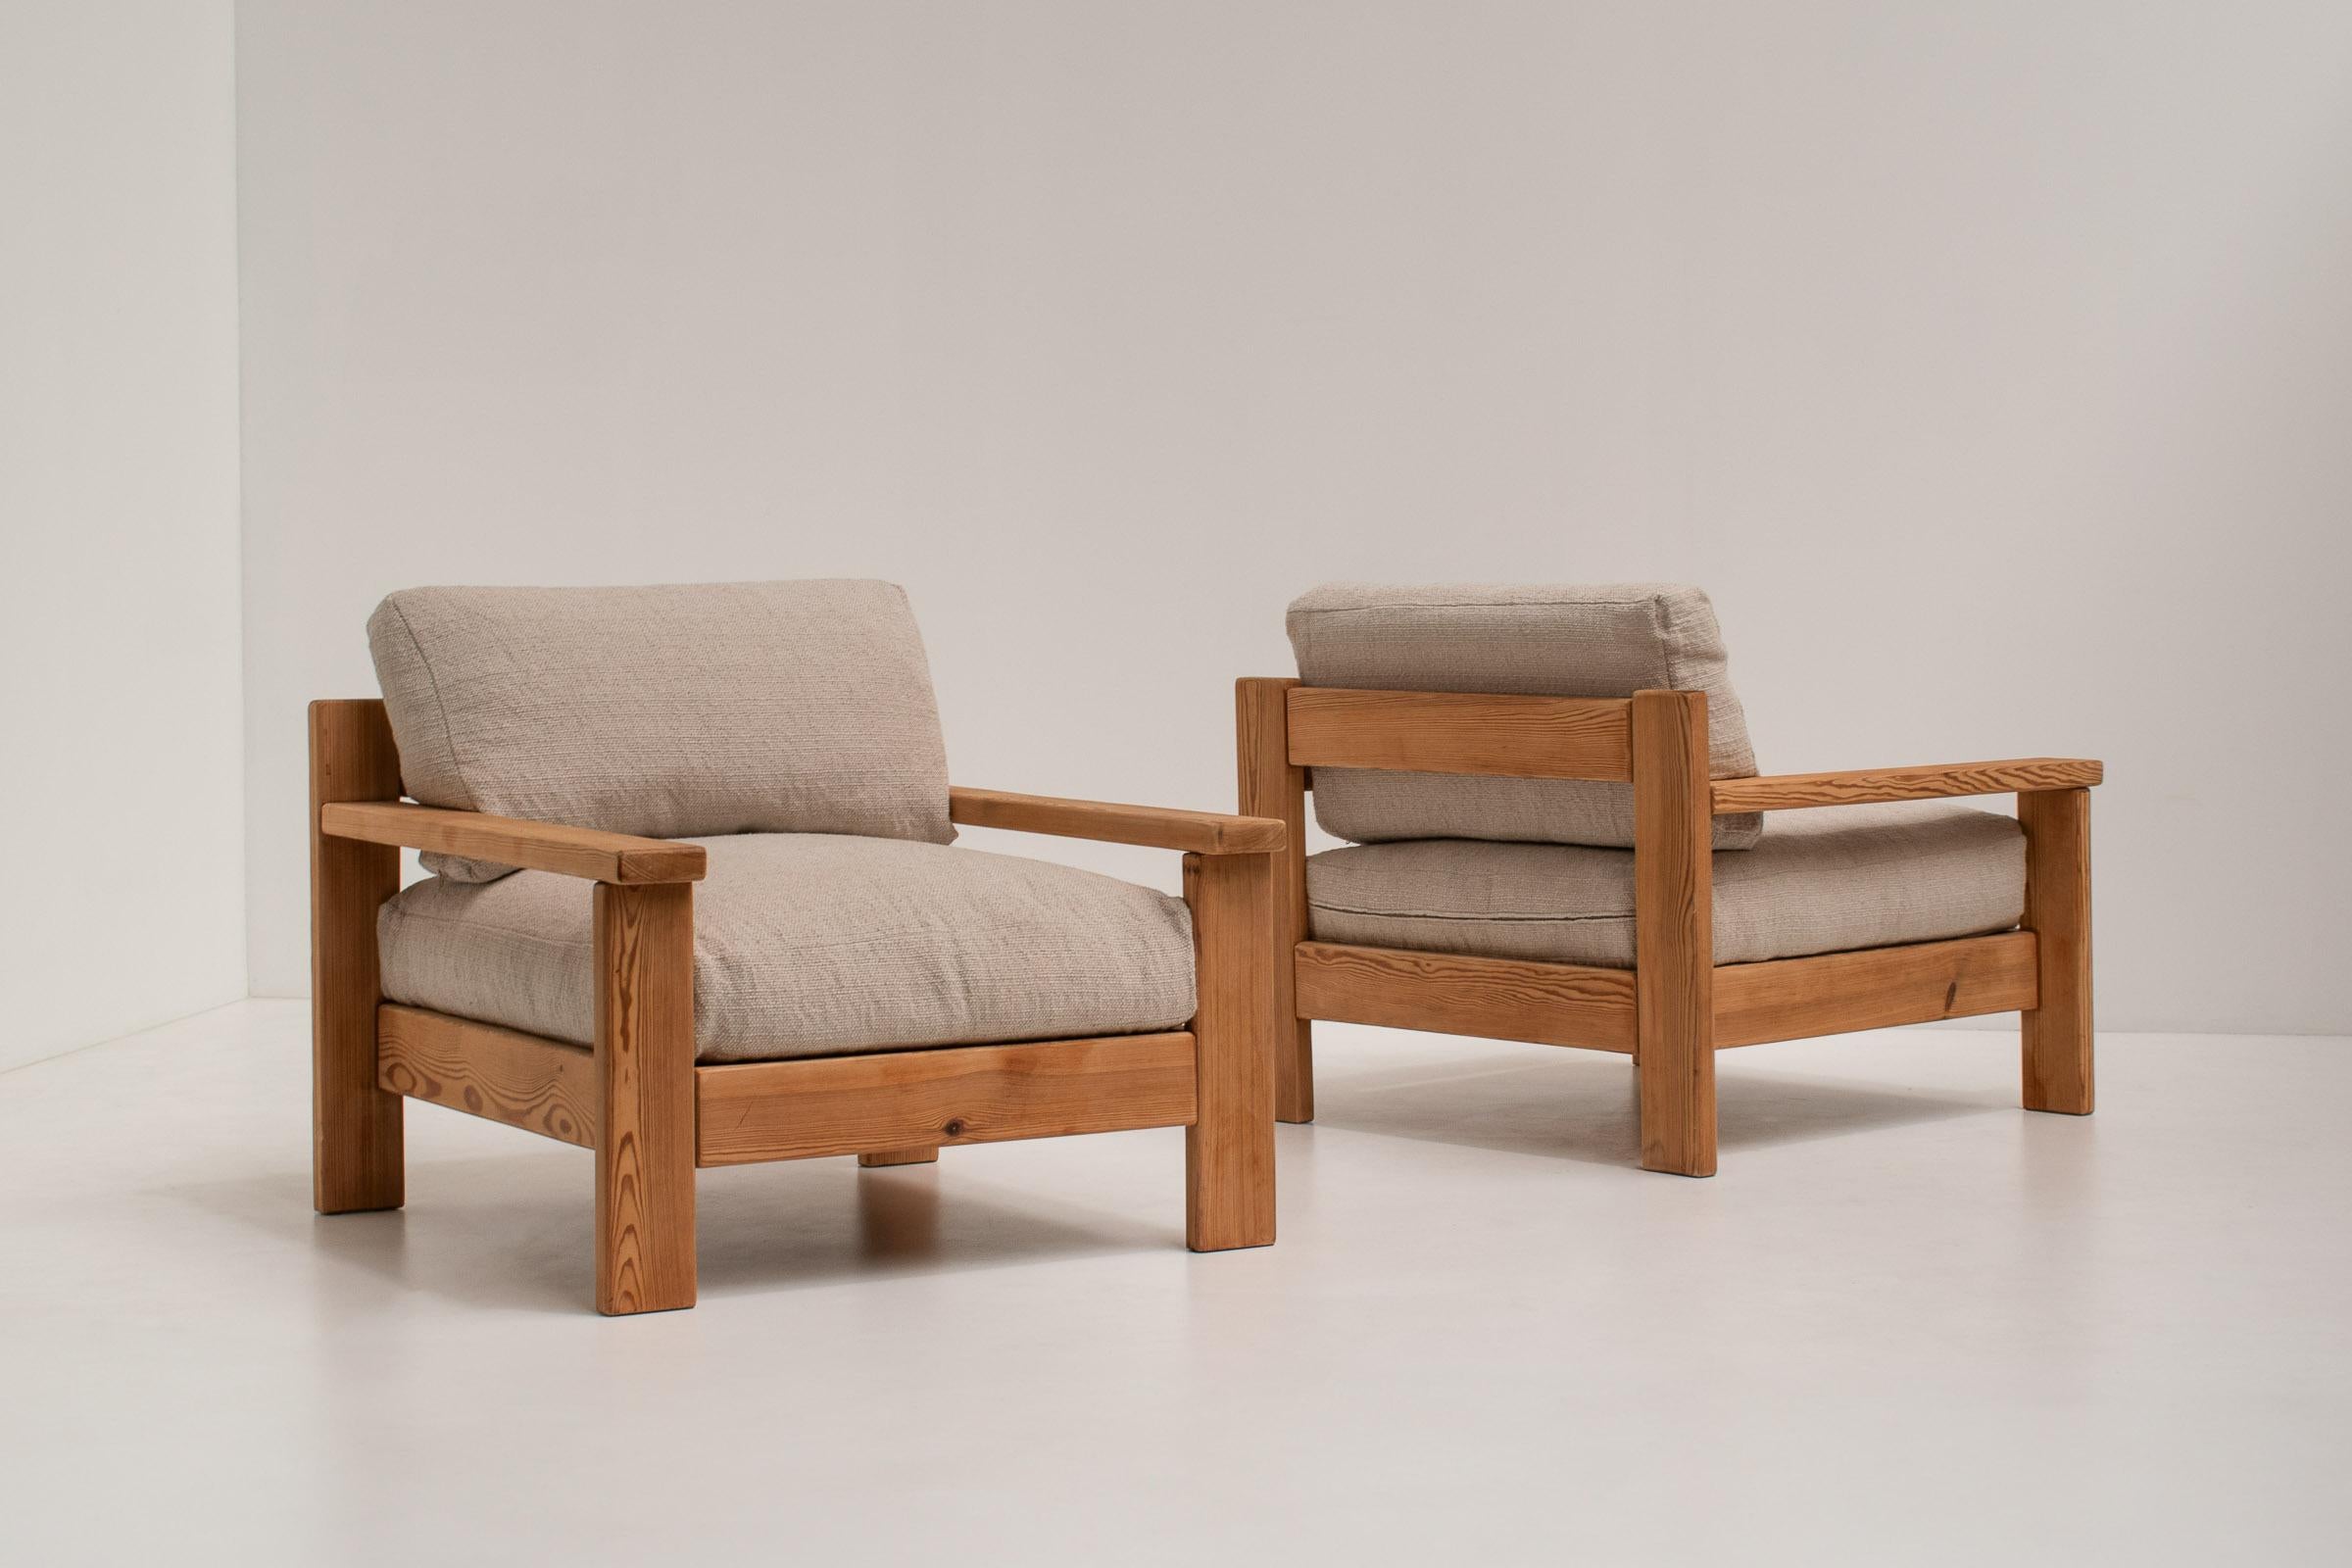 Late 20th Century Minimalistic Mid-century Modern Lounge Chairs in Natural Wood, Italy, 1970s For Sale